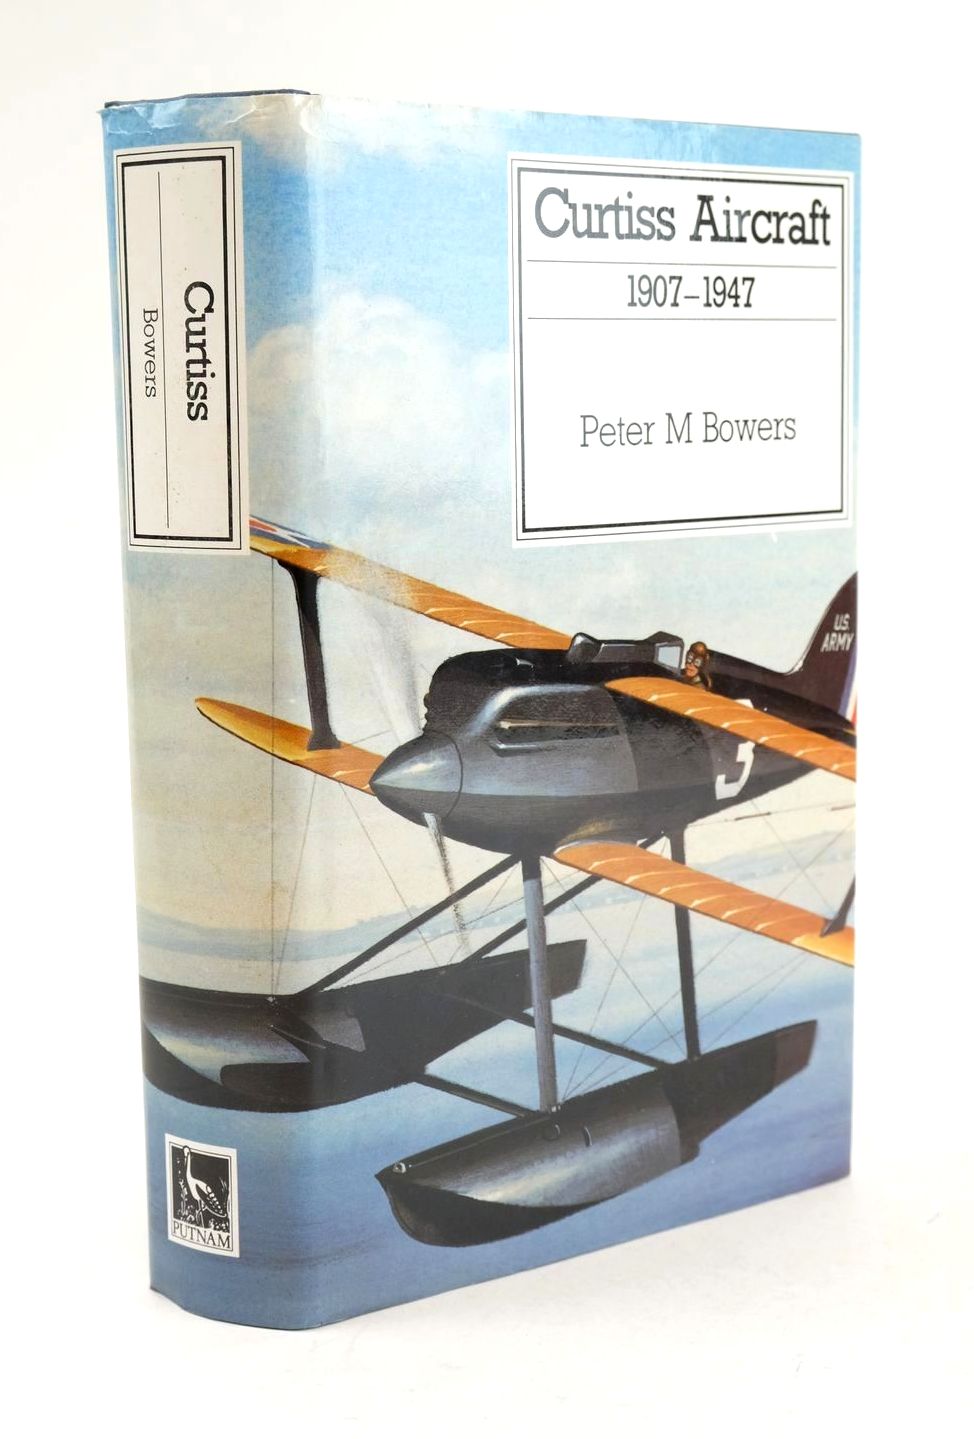 Photo of CURTISS AIRCRAFT 1907-1947 written by Bowers, Peter M. published by Putnam (STOCK CODE: 1325115)  for sale by Stella & Rose's Books